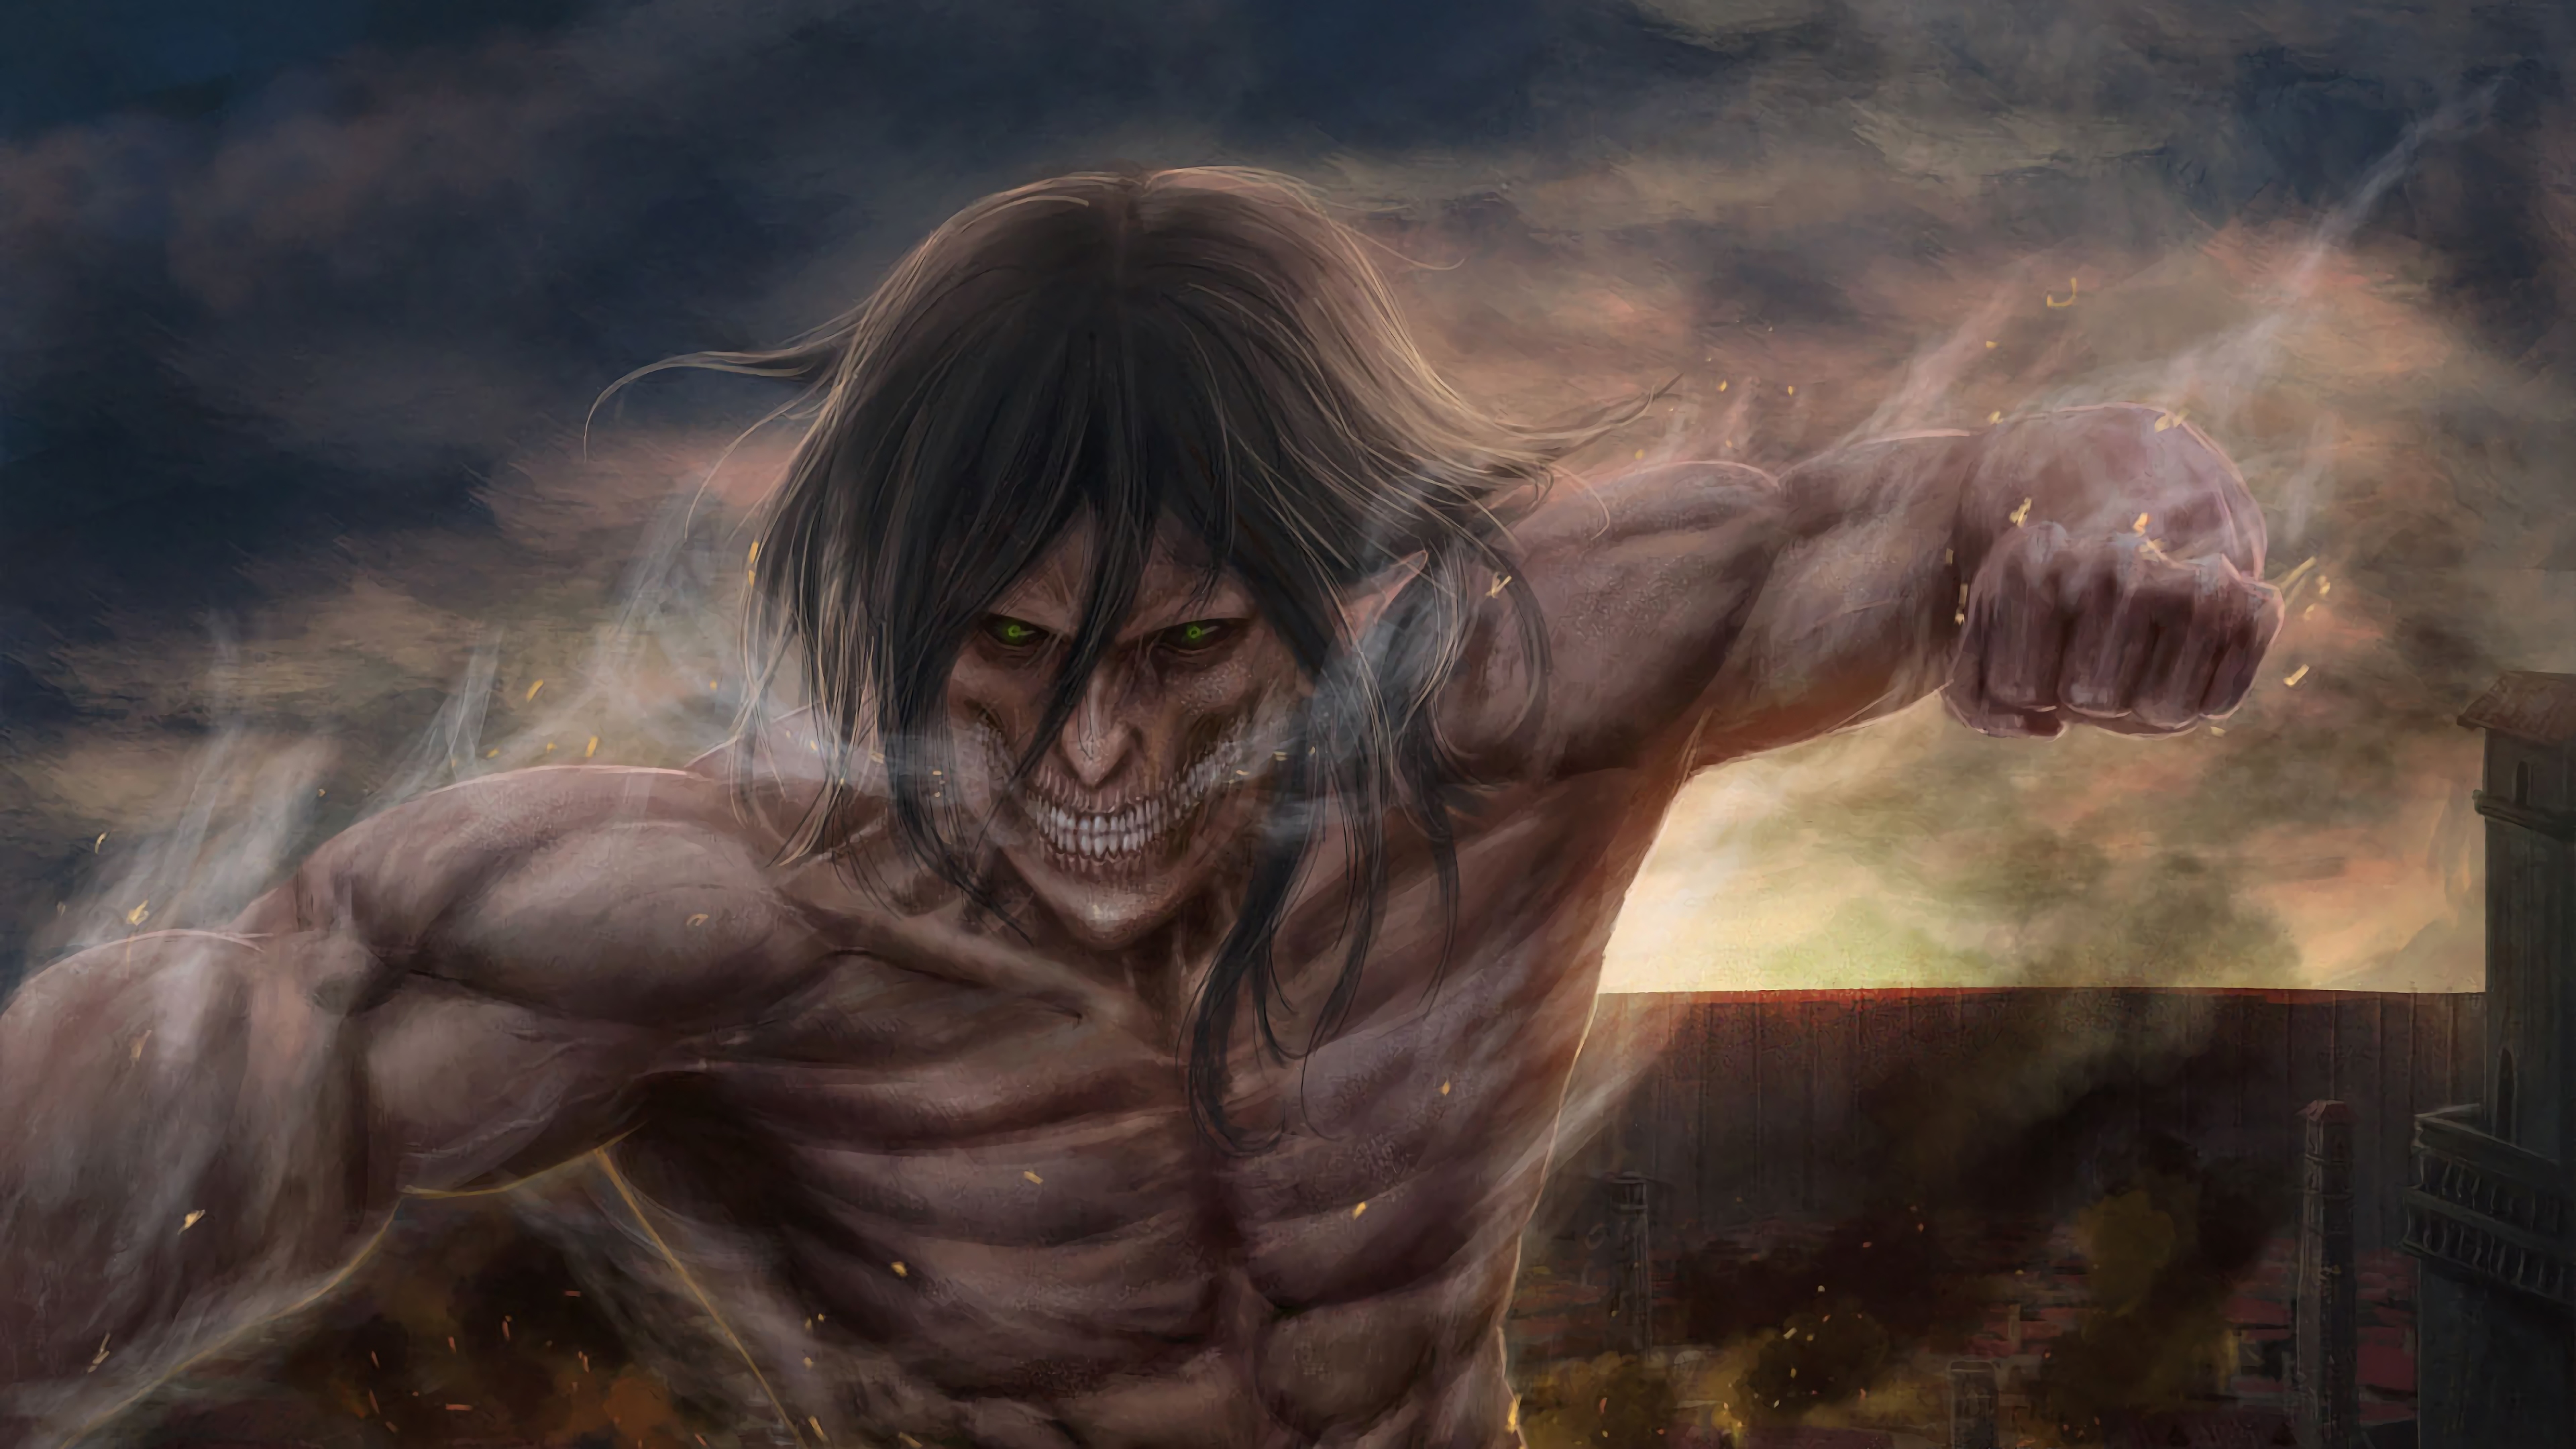 attack on titan computer Wallpapers